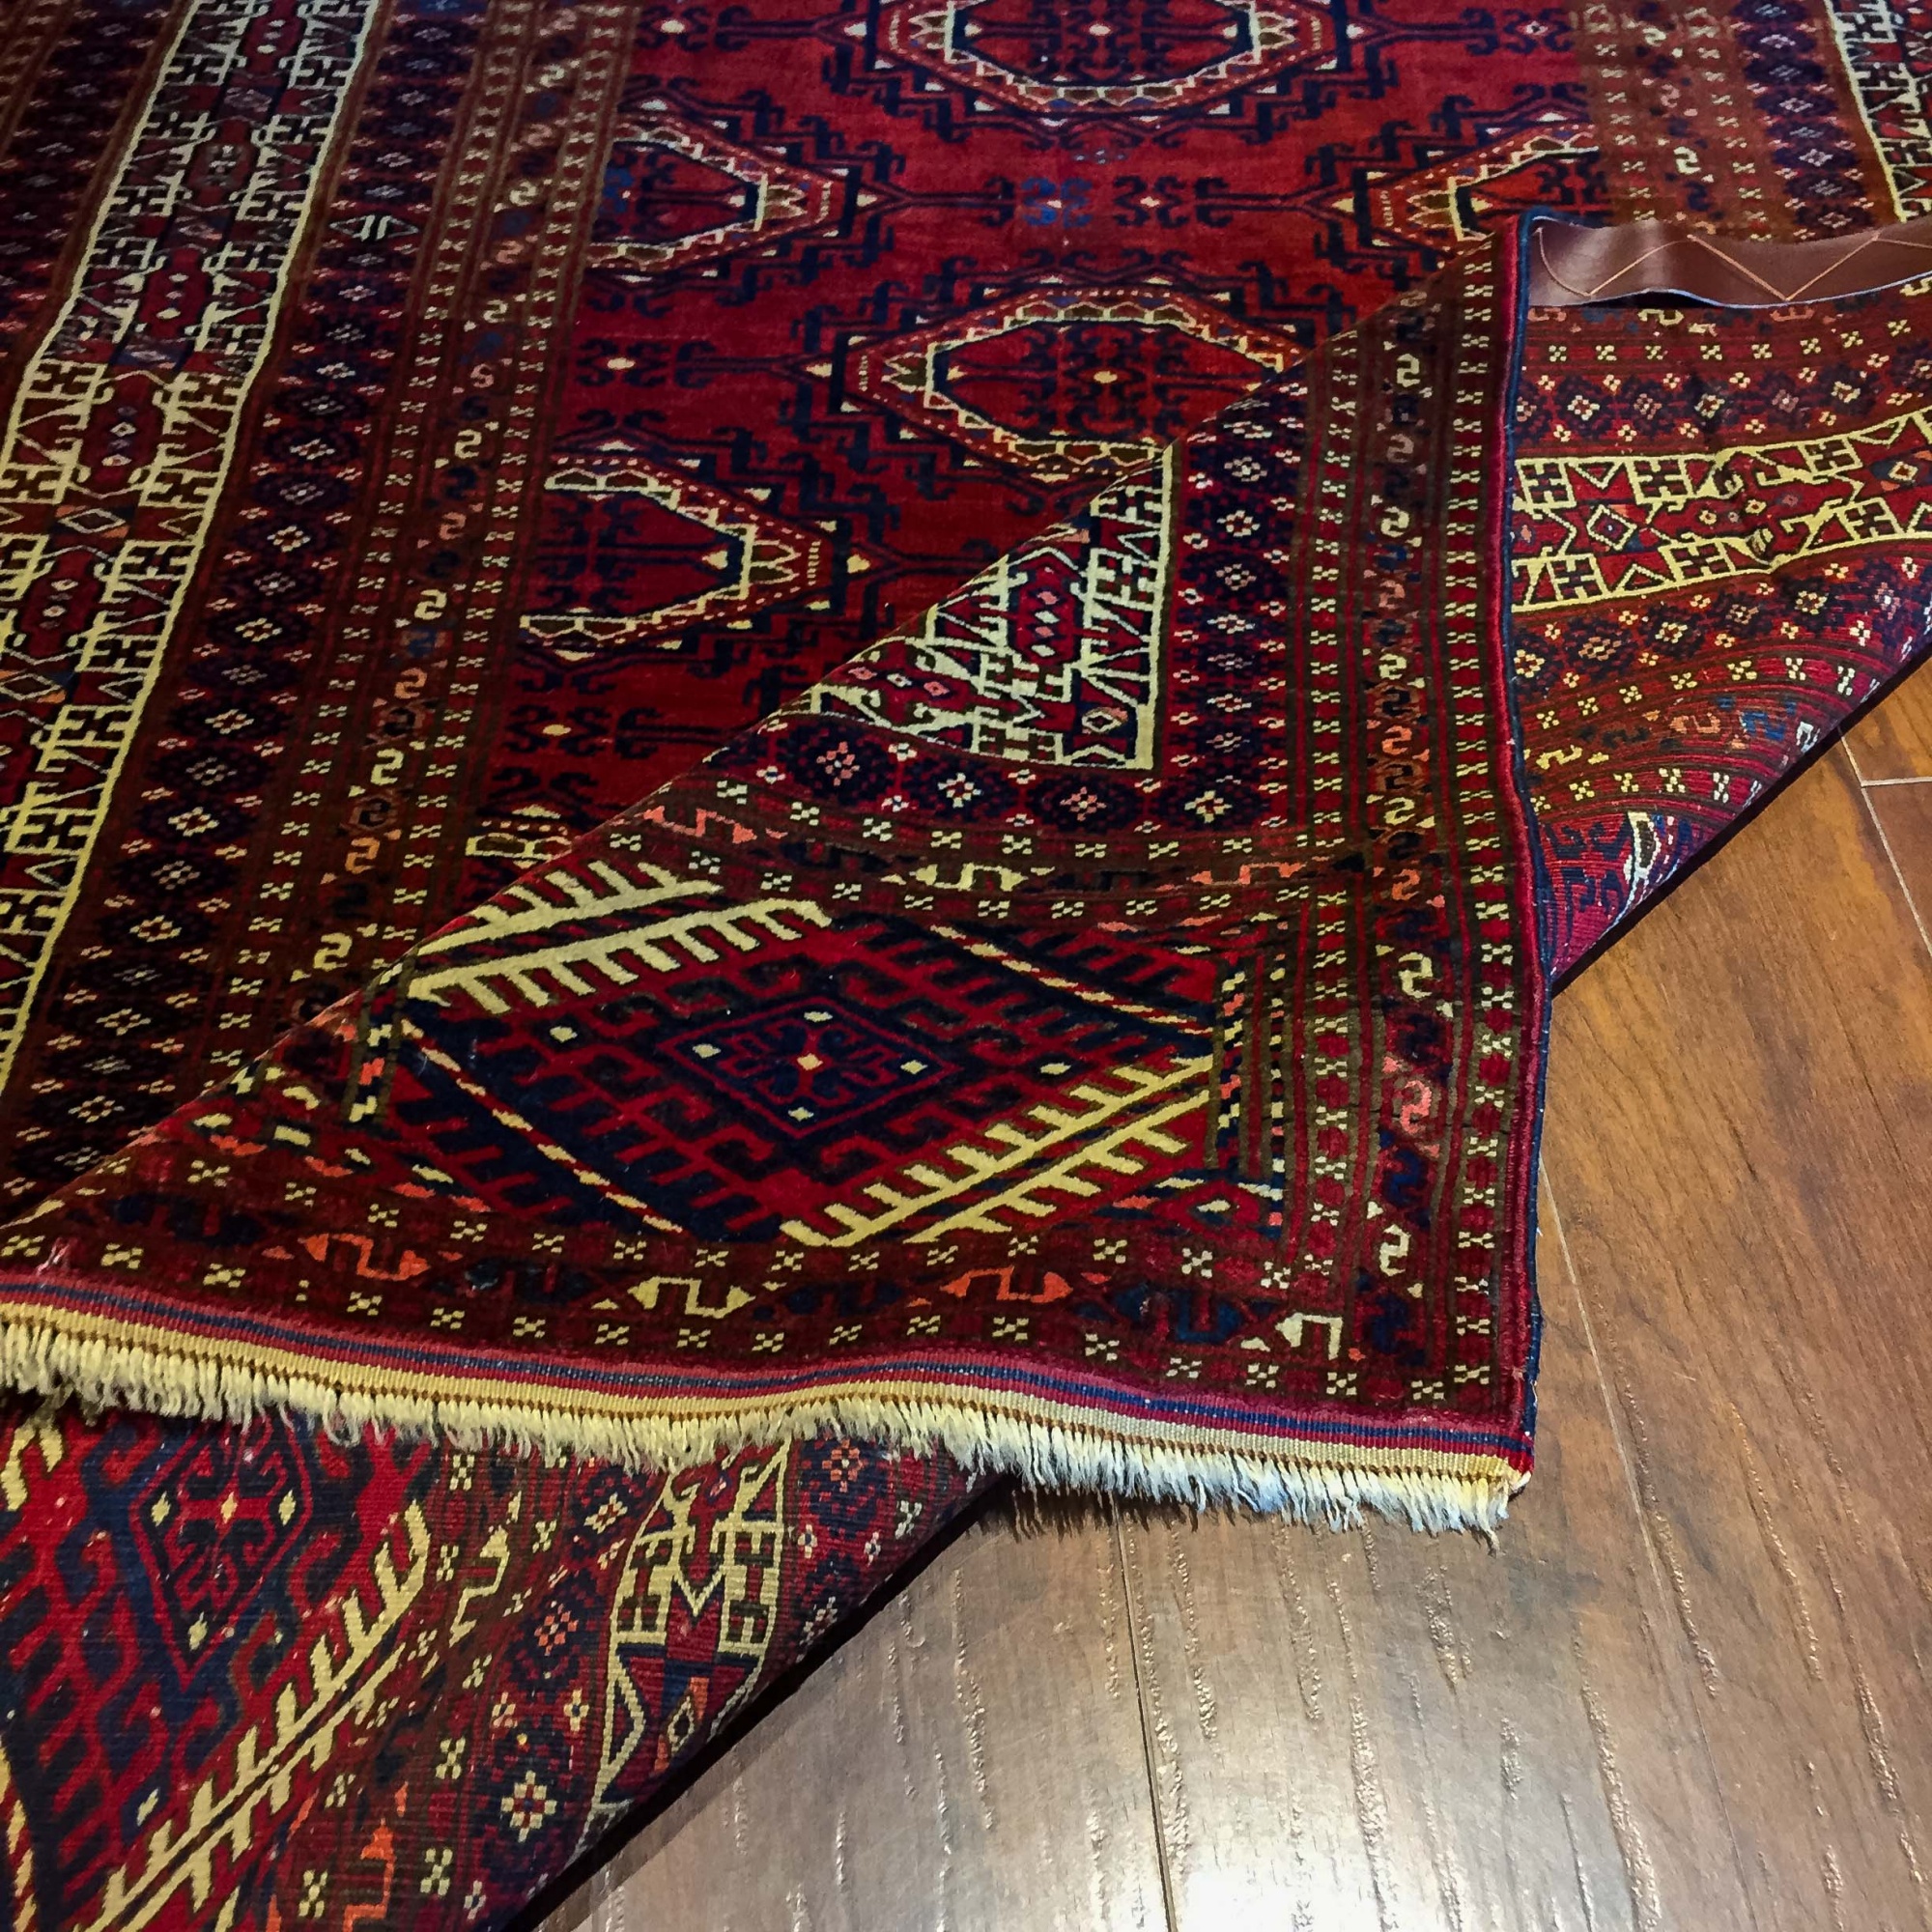 Area rug for living space and any room. Floor decor, rugs and carpets from Tabrizi Rugs. Torkman 145 - 4'2